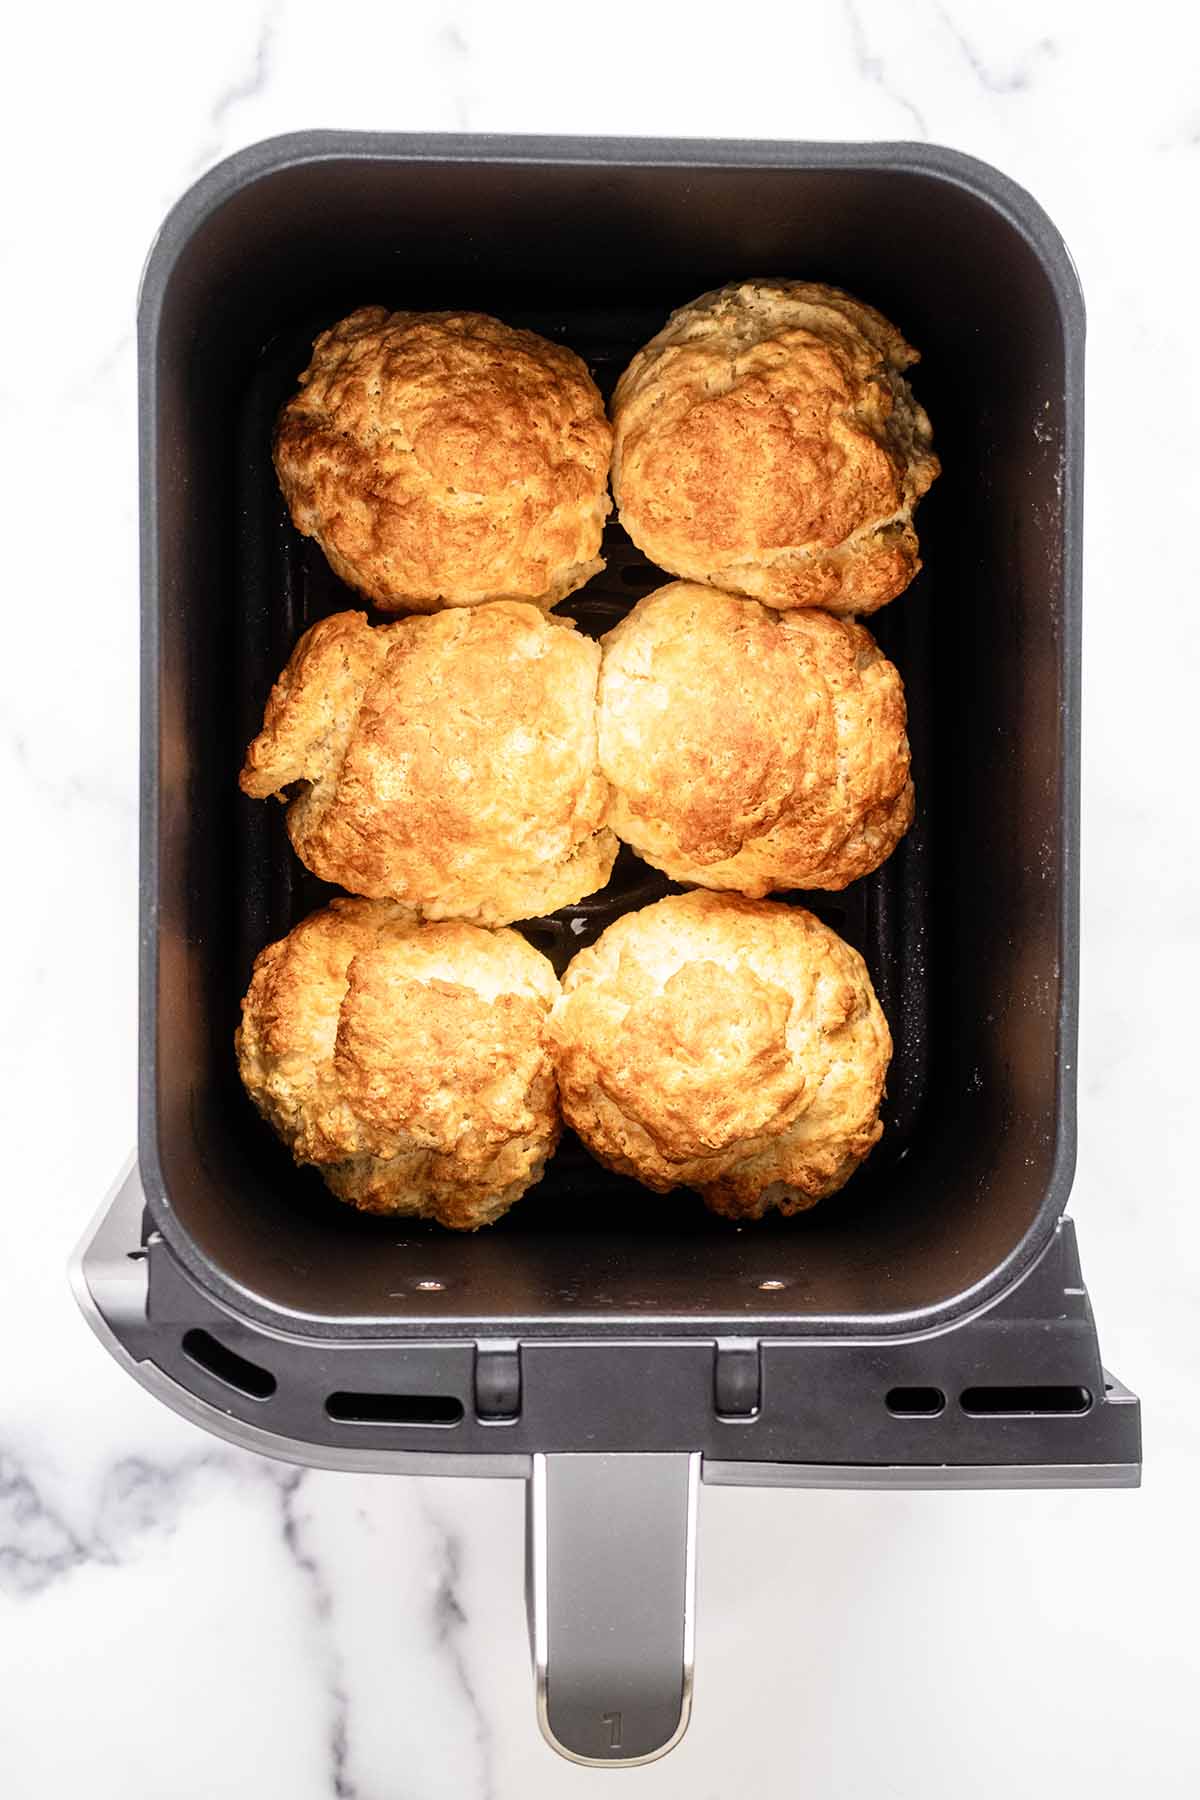 Six baked biscuits in an air fryer basket.